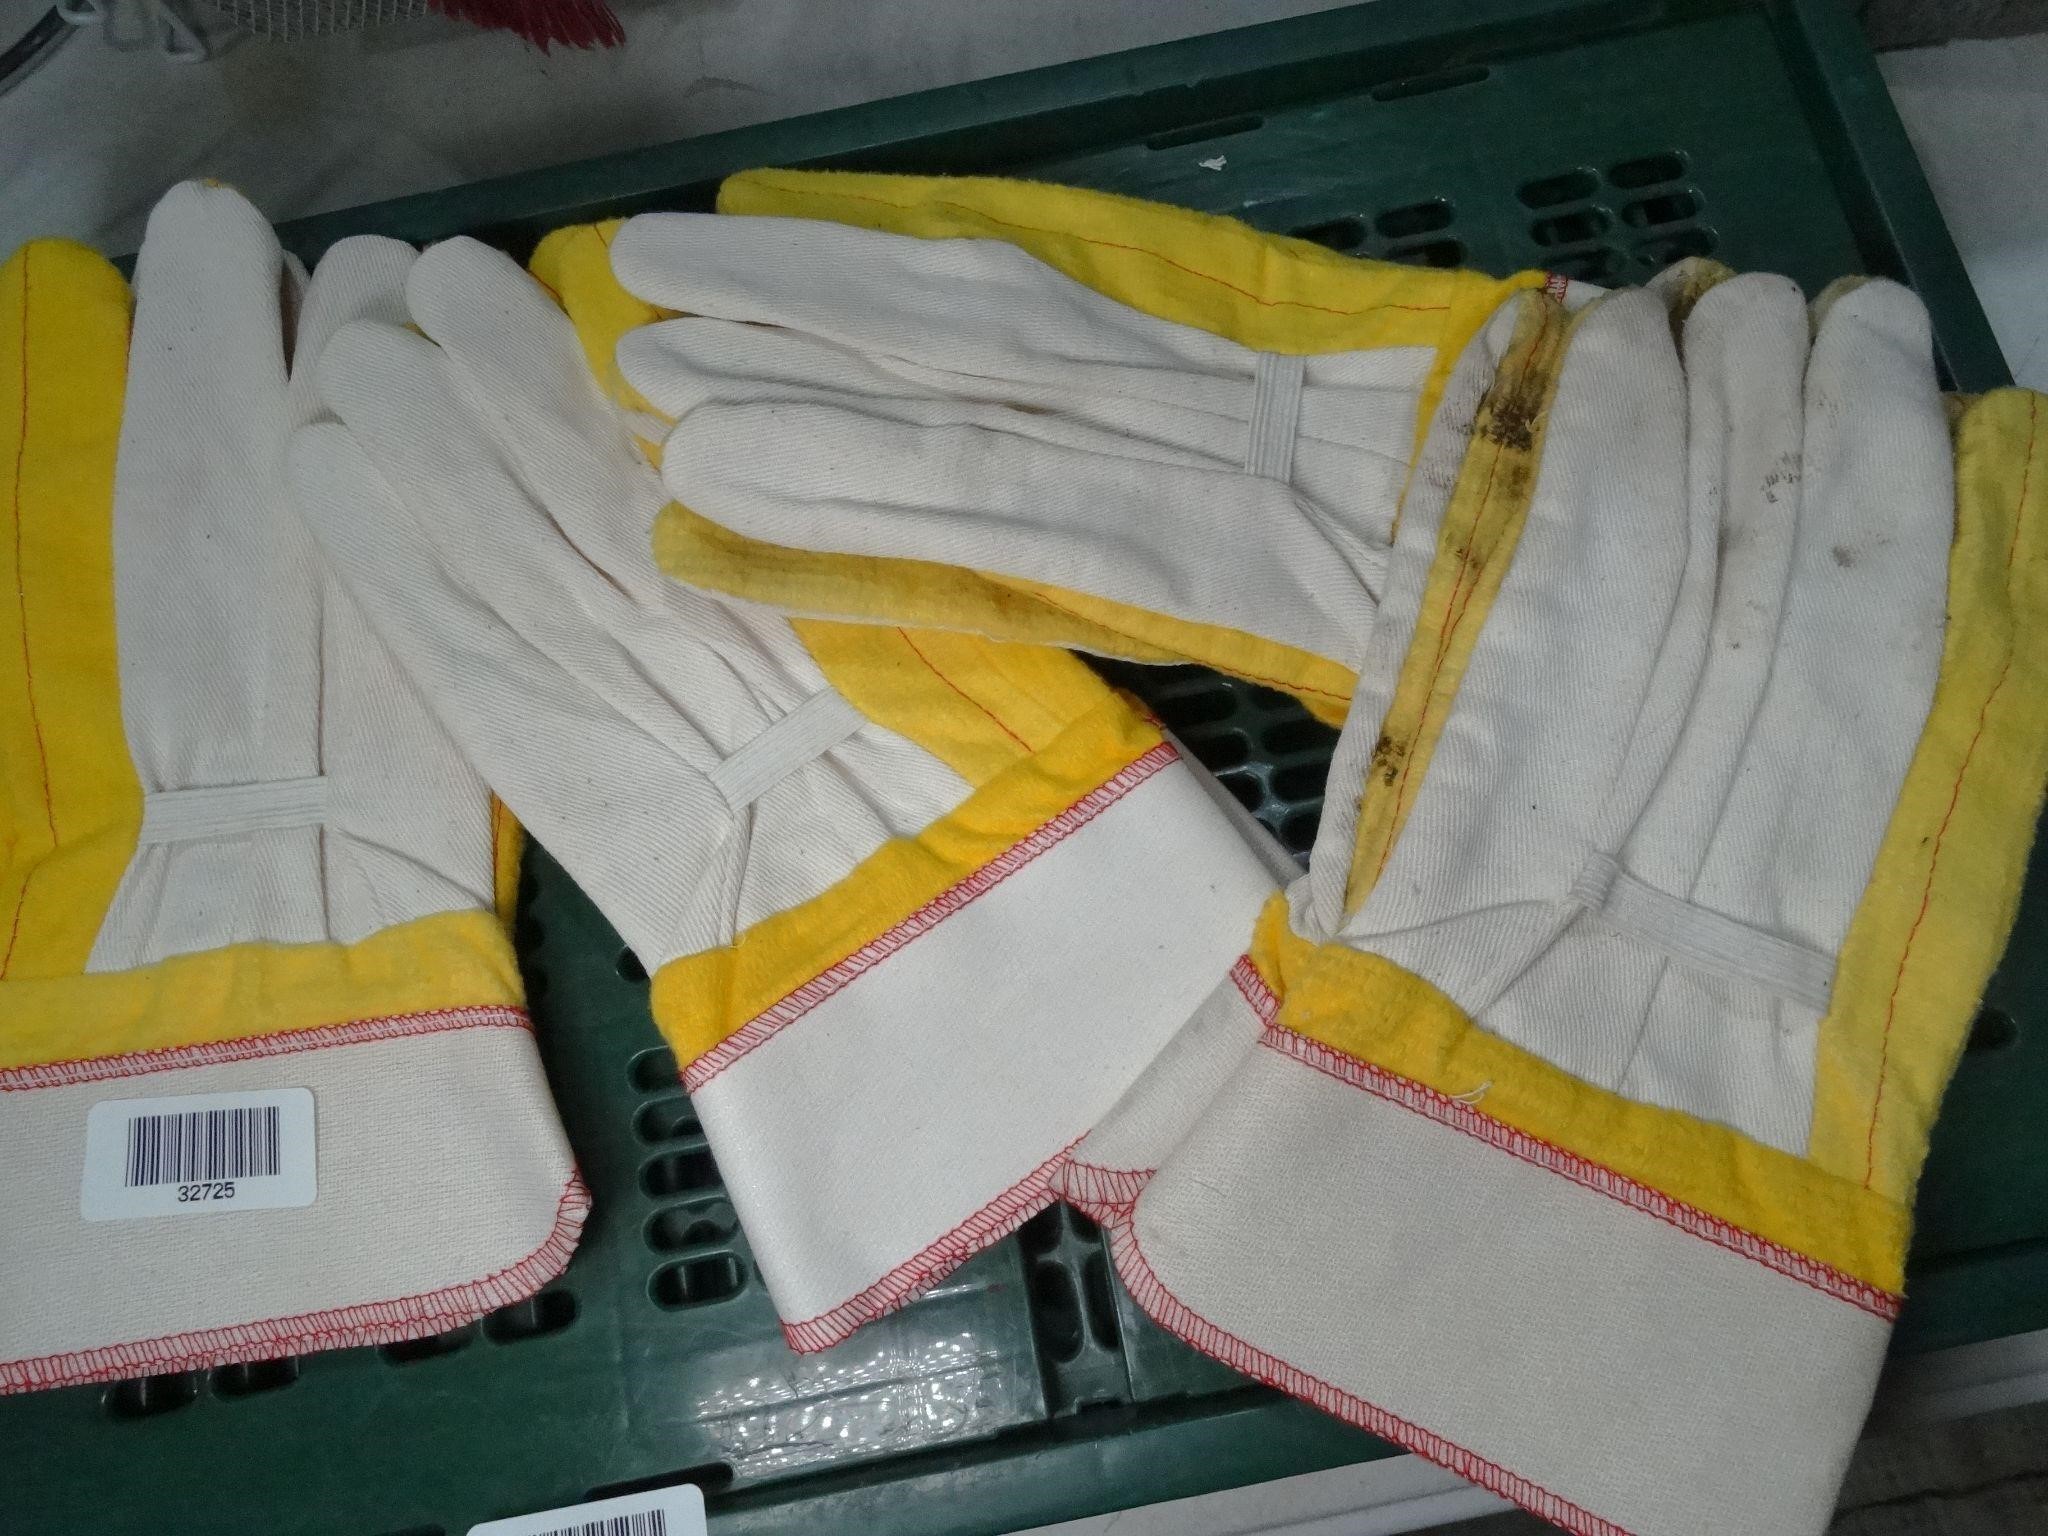 4 Pairs of Work Gloves